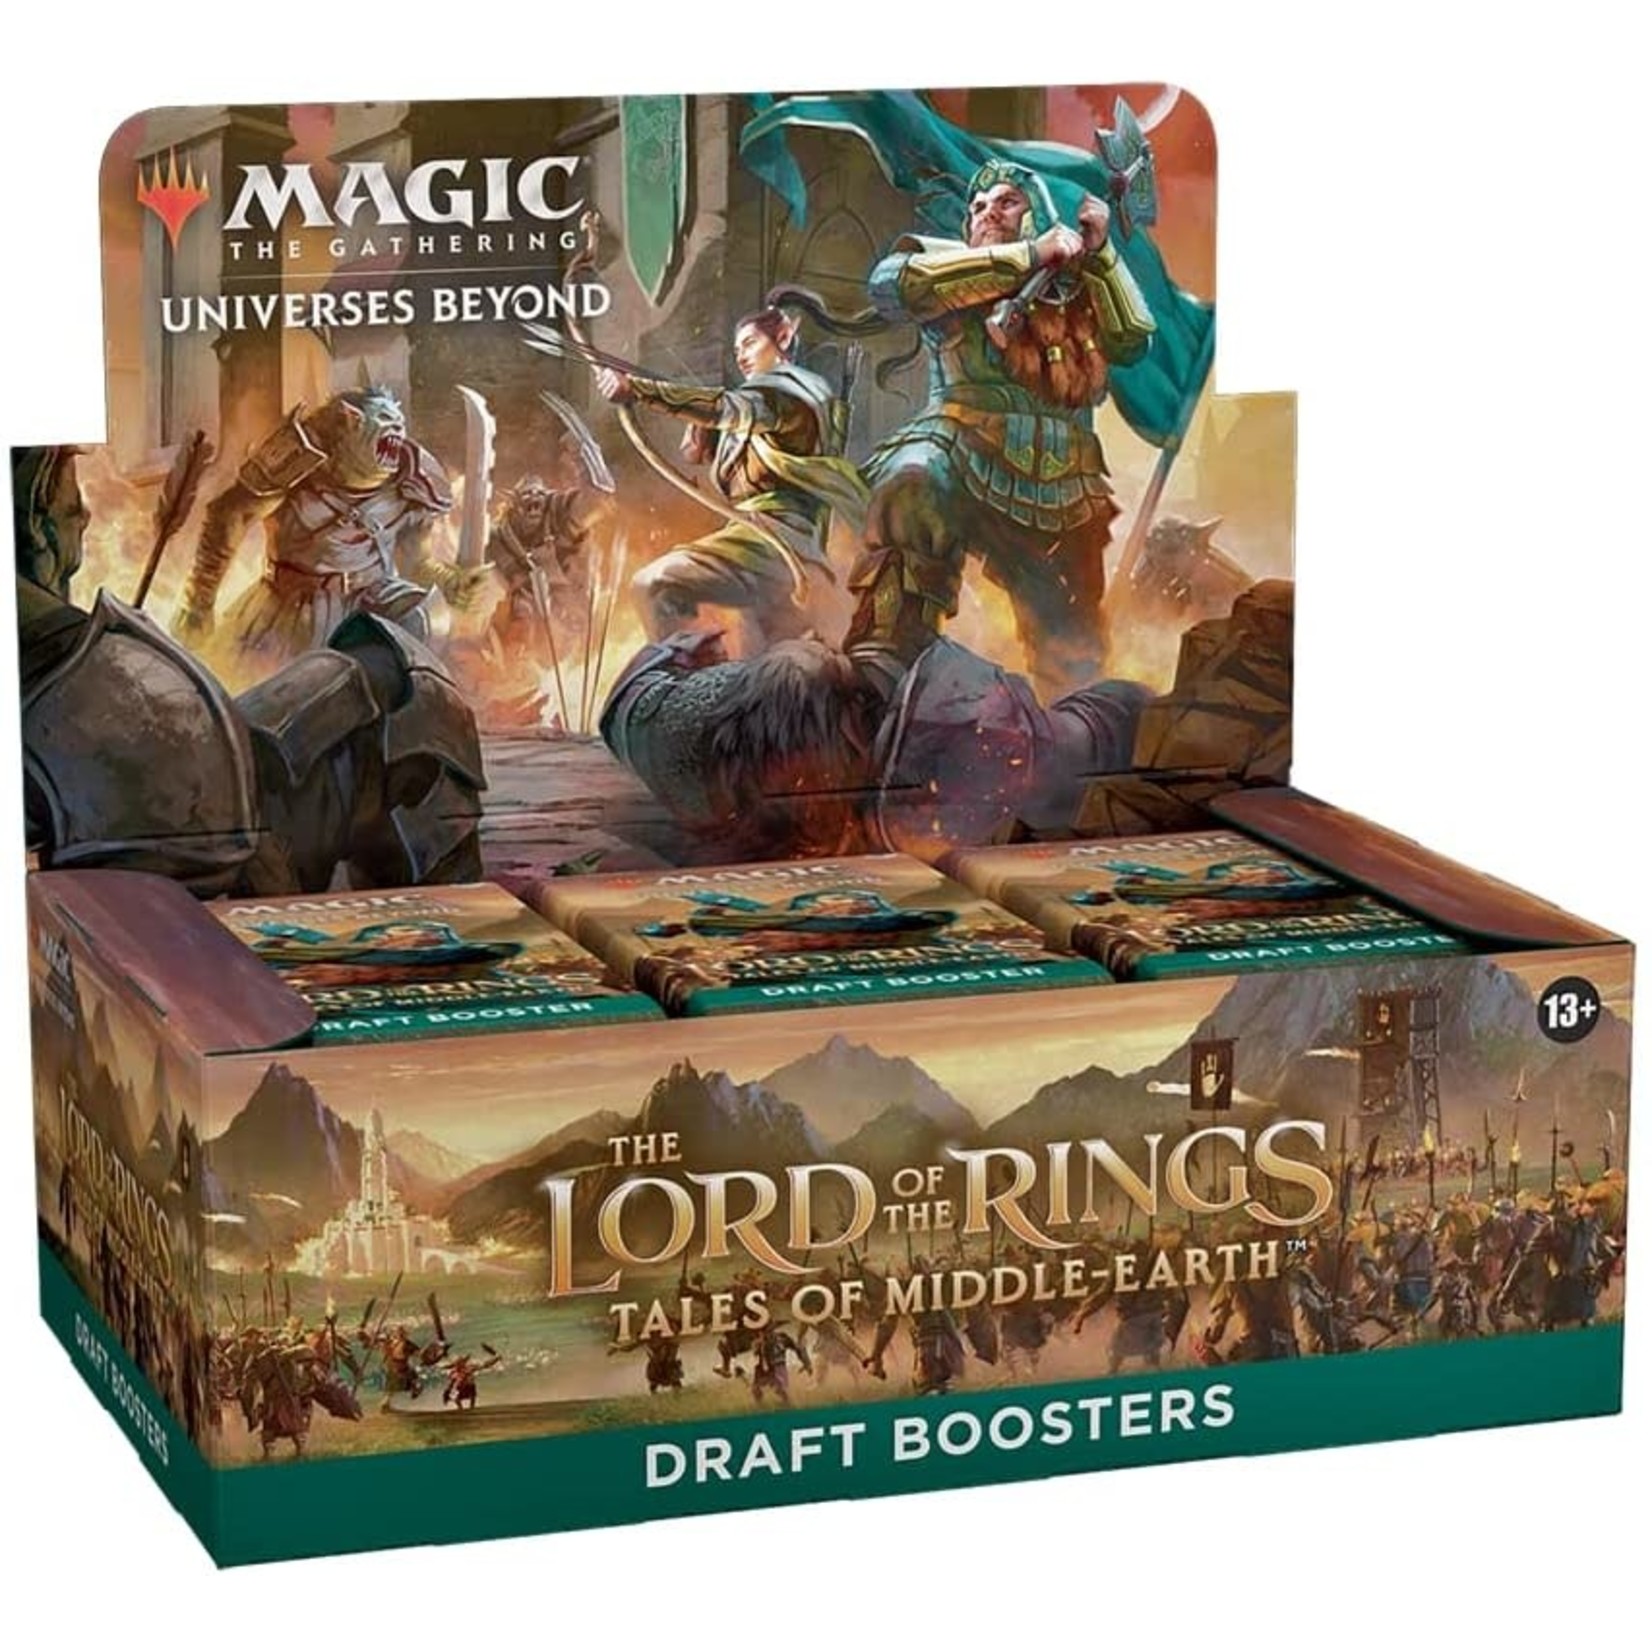 The Lord of the Rings Tales of Middle-Earth Draft Booster Box